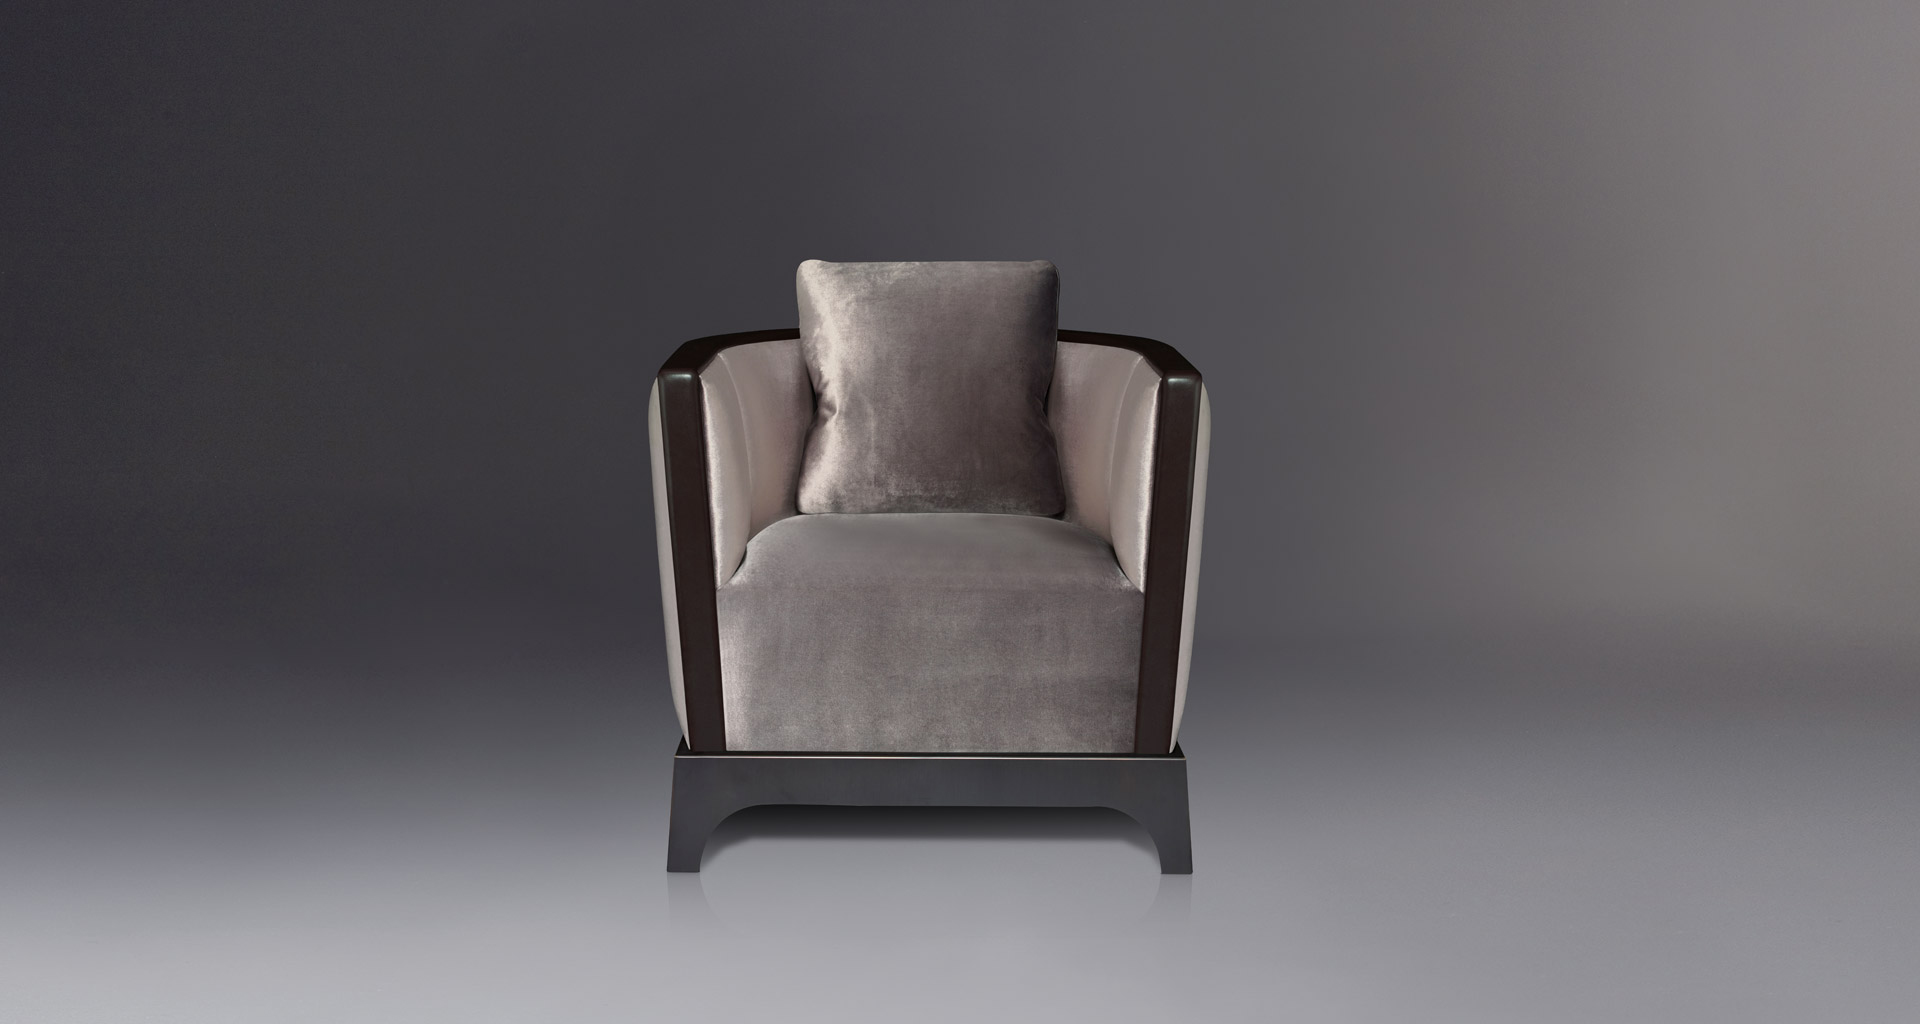 Grosvenor is a wooden armchair with fabric covering and leather details, from Promemoria's The London Collection | Promemoria